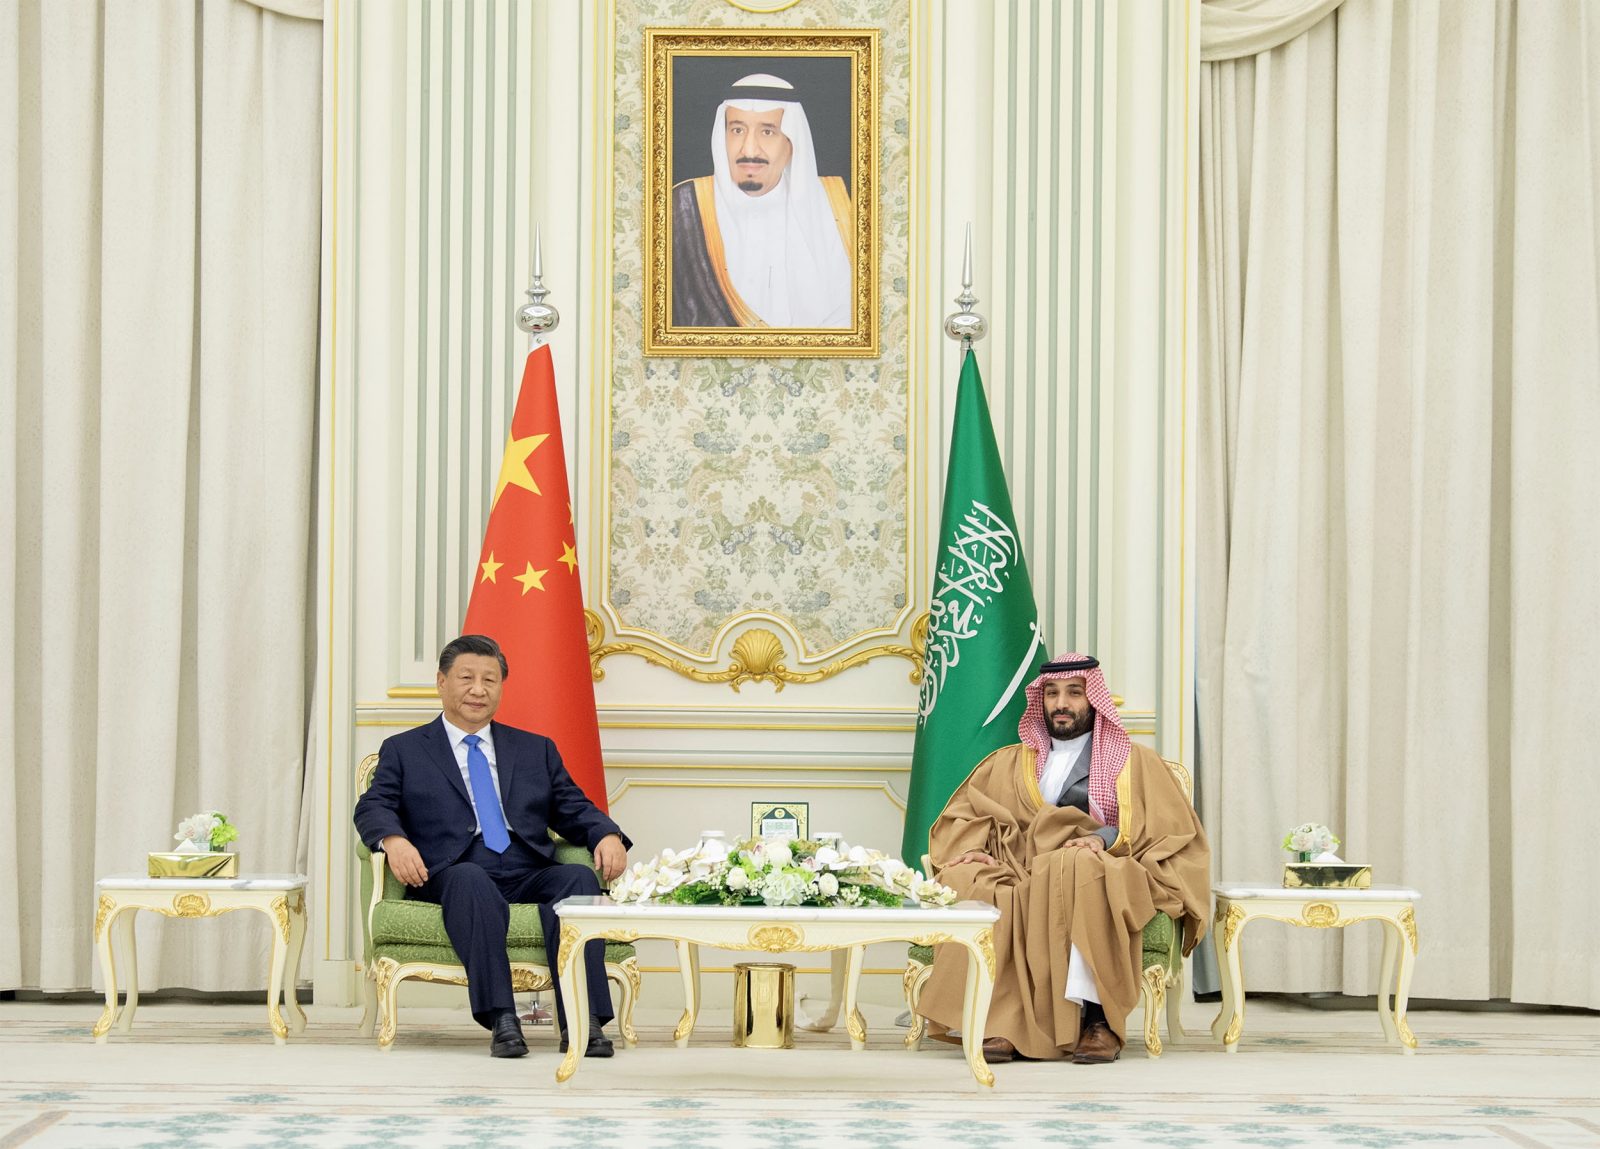 epa10354860 A handout photo made available by the Saudi Royal Court shows Saudi Crown Prince Mohammed bin Salman (R) during his meeting with Chinese President Xi Jinping (L) at Al Yamamah Palace in Riyadh, Saudi Arabia, 08 December 2022. Chinese President Xi Jinping is on a three day working visit to Saudi Arabia, in the framework of strengthening the ties between the two countires, as well as a summit with the members of the Gulf Cooperation Council and a wider China-Arab summit.  EPA/BANDAR ALJALOUD / HANDOUT  HANDOUT EDITORIAL USE ONLY/NO SALES